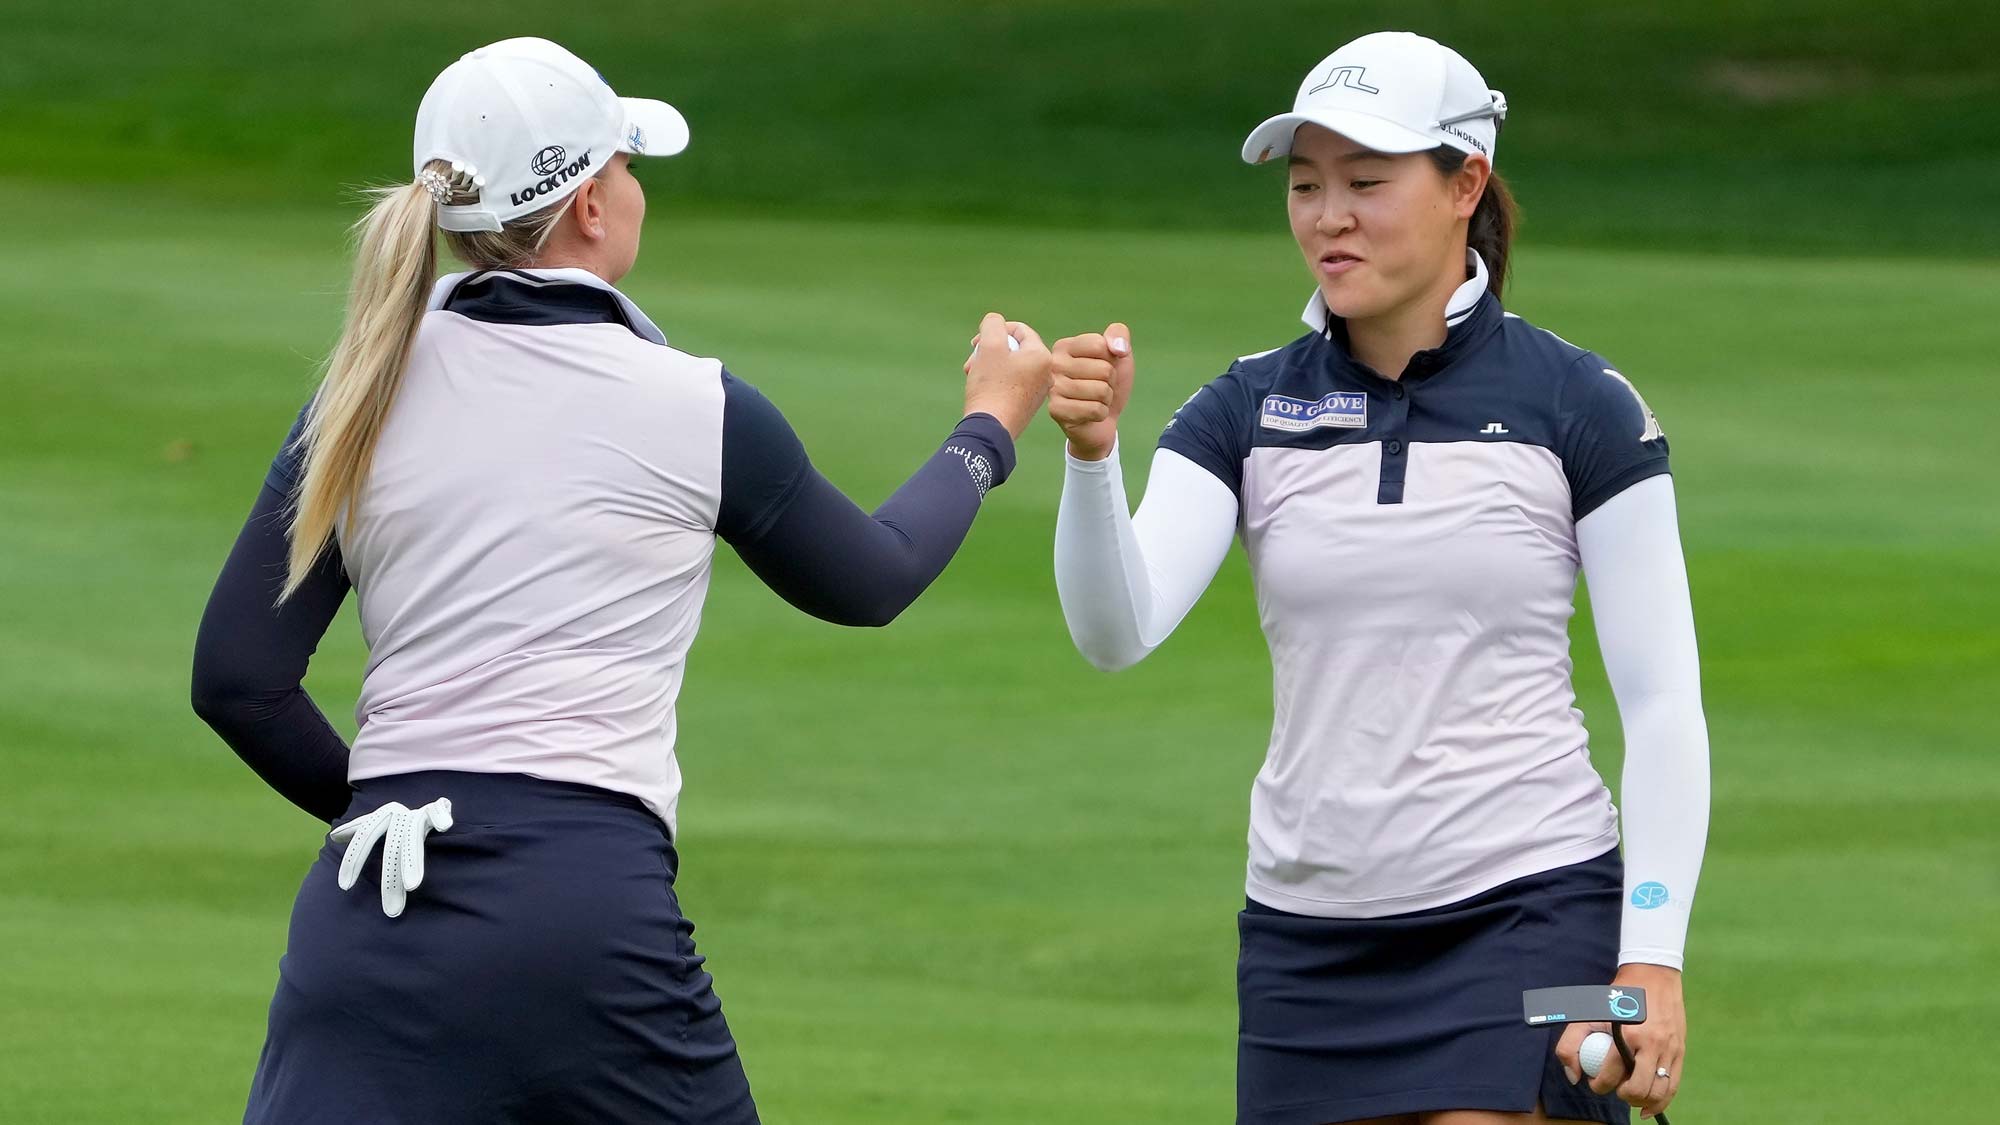 Matilda Castren of Finland (L) and Kelly Tan of Malaysia celebrate after making birdie on the eighth green during the final round of the Dow Great Lakes Bay Invitational